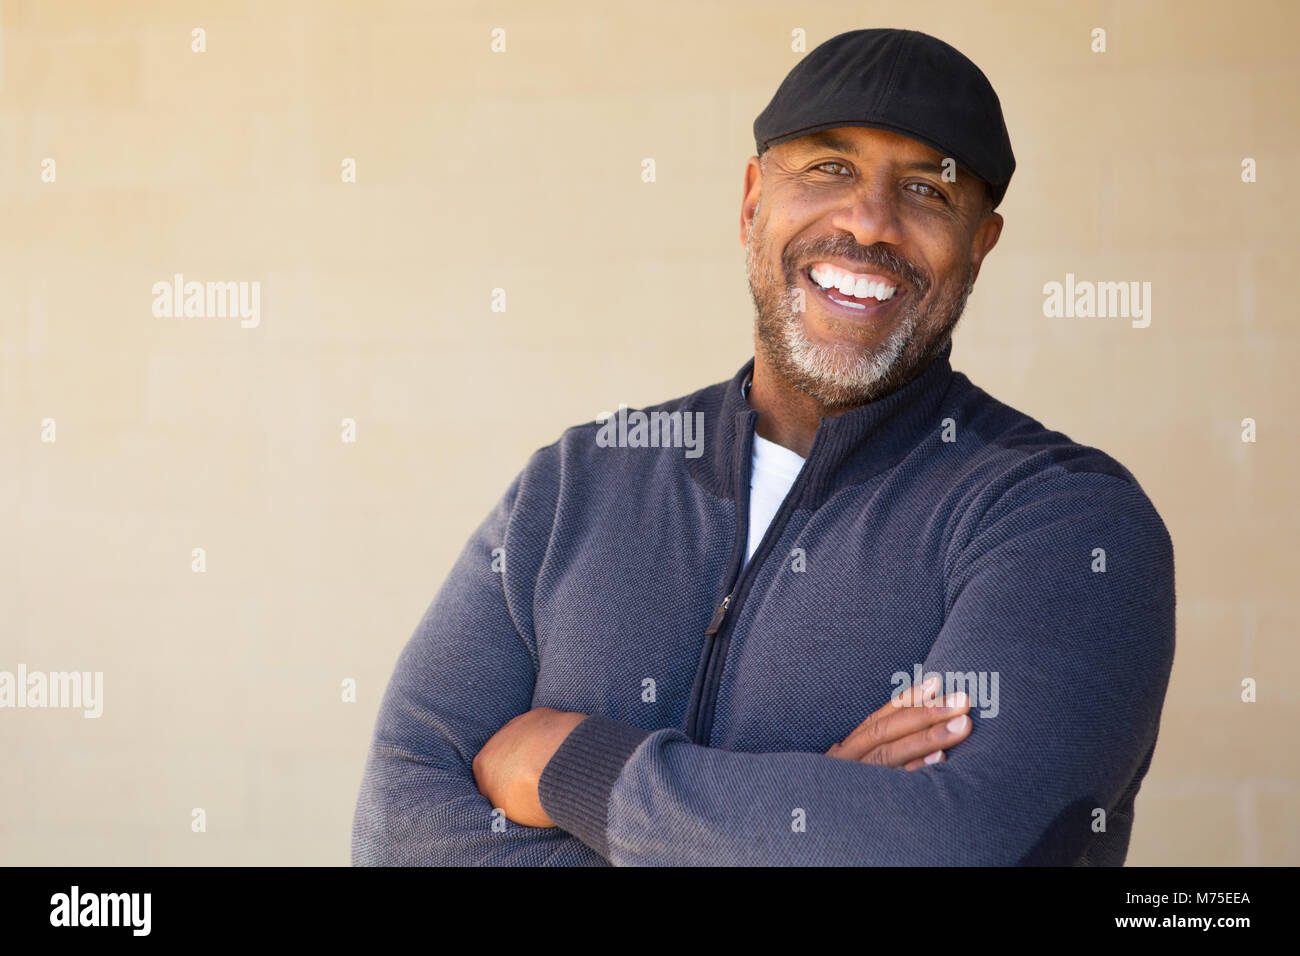 Young African American Man Smiling Banque D'Images